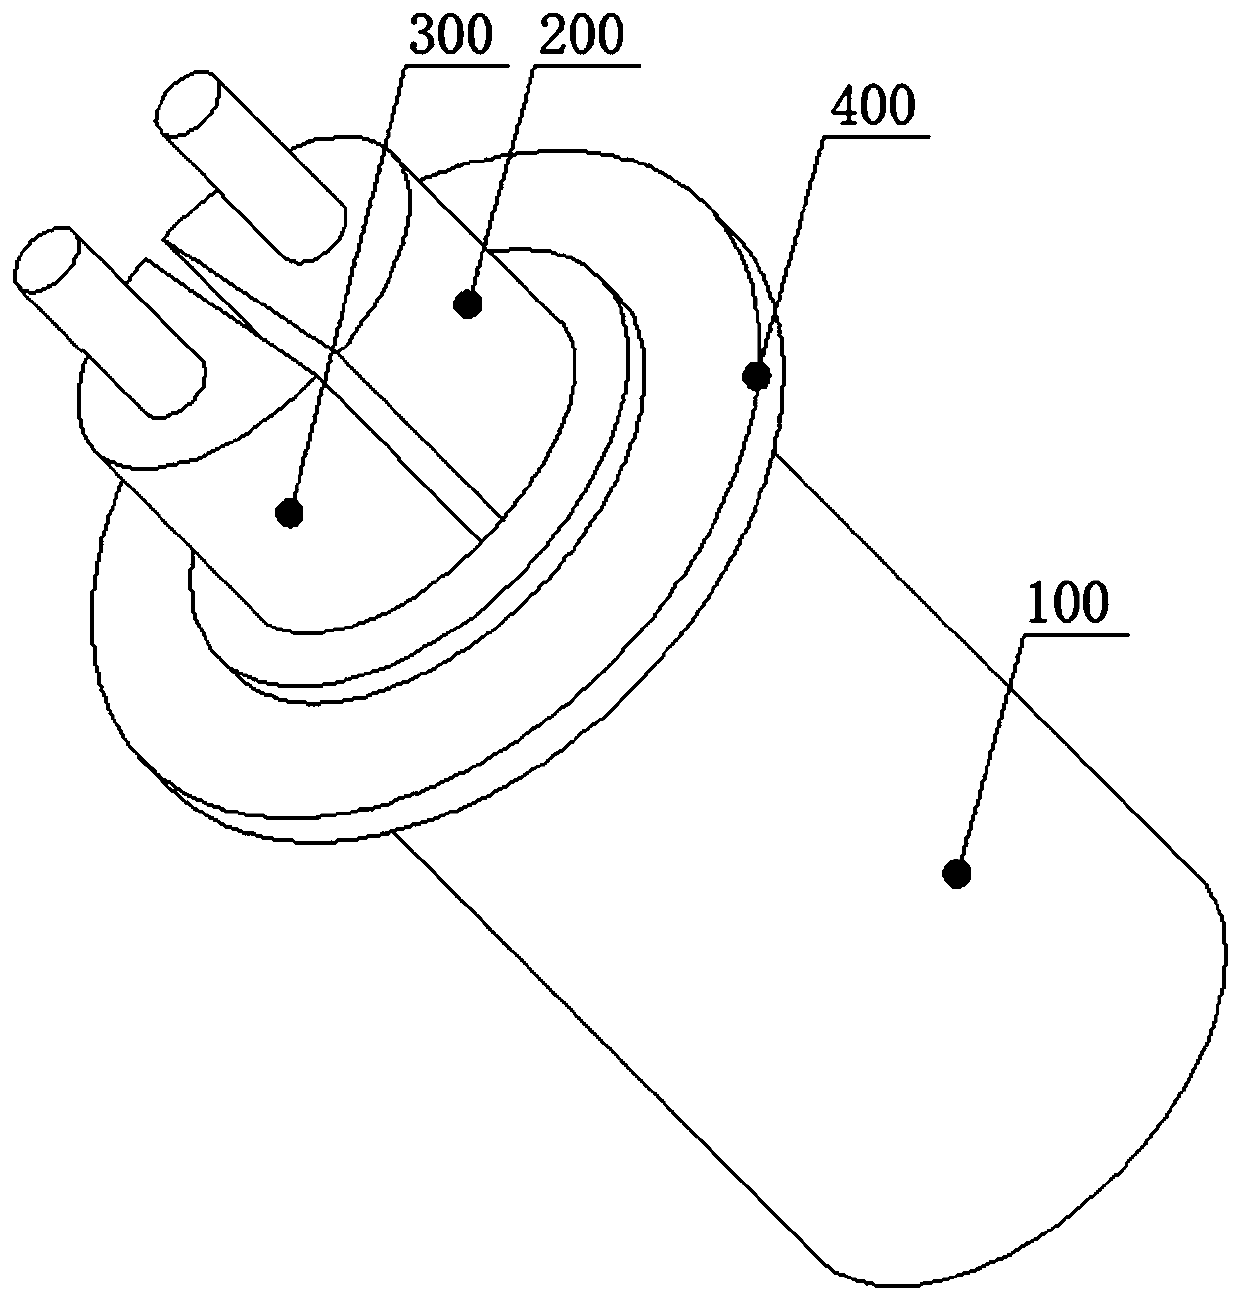 Blood flow velocity monitoring device and method based on carotid artery stent